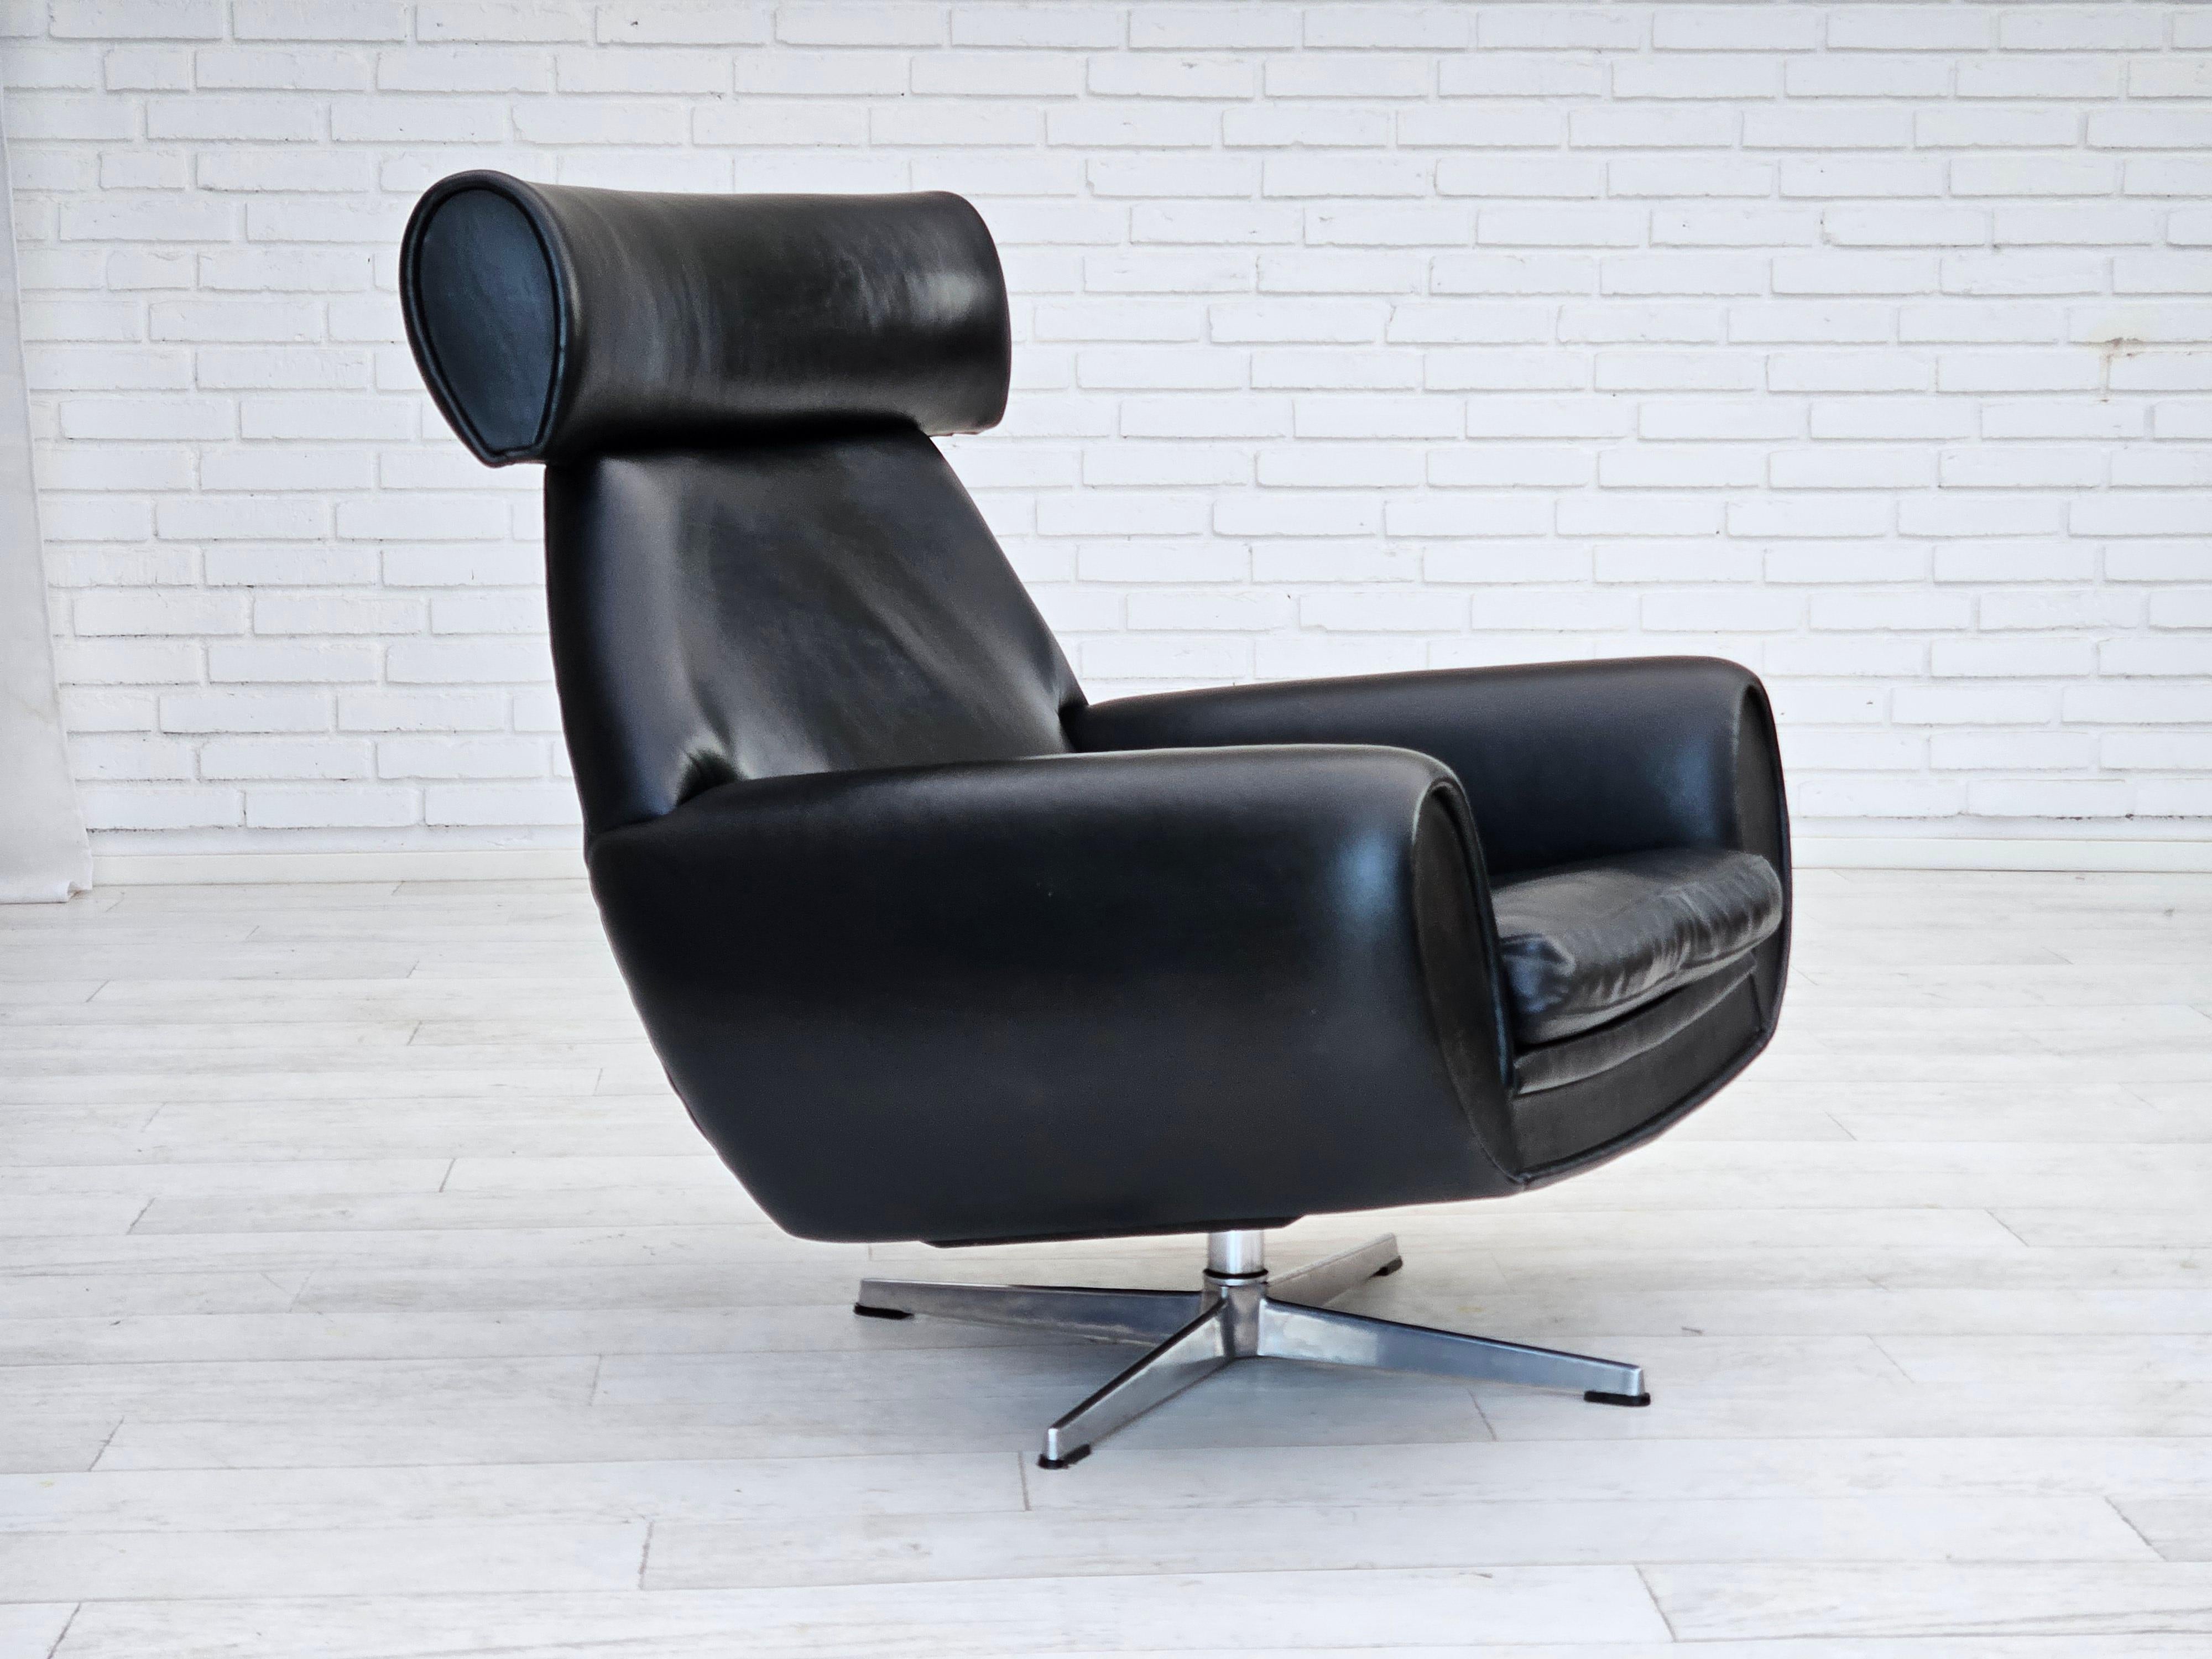 1960s, Danish swivel chair in original very good condition: no smells and no stains. The chair used not too much from the 1960s. Original black leather, cast aluminum base. Manufactured by Danish furniture manufacturer in about 1960-65s.